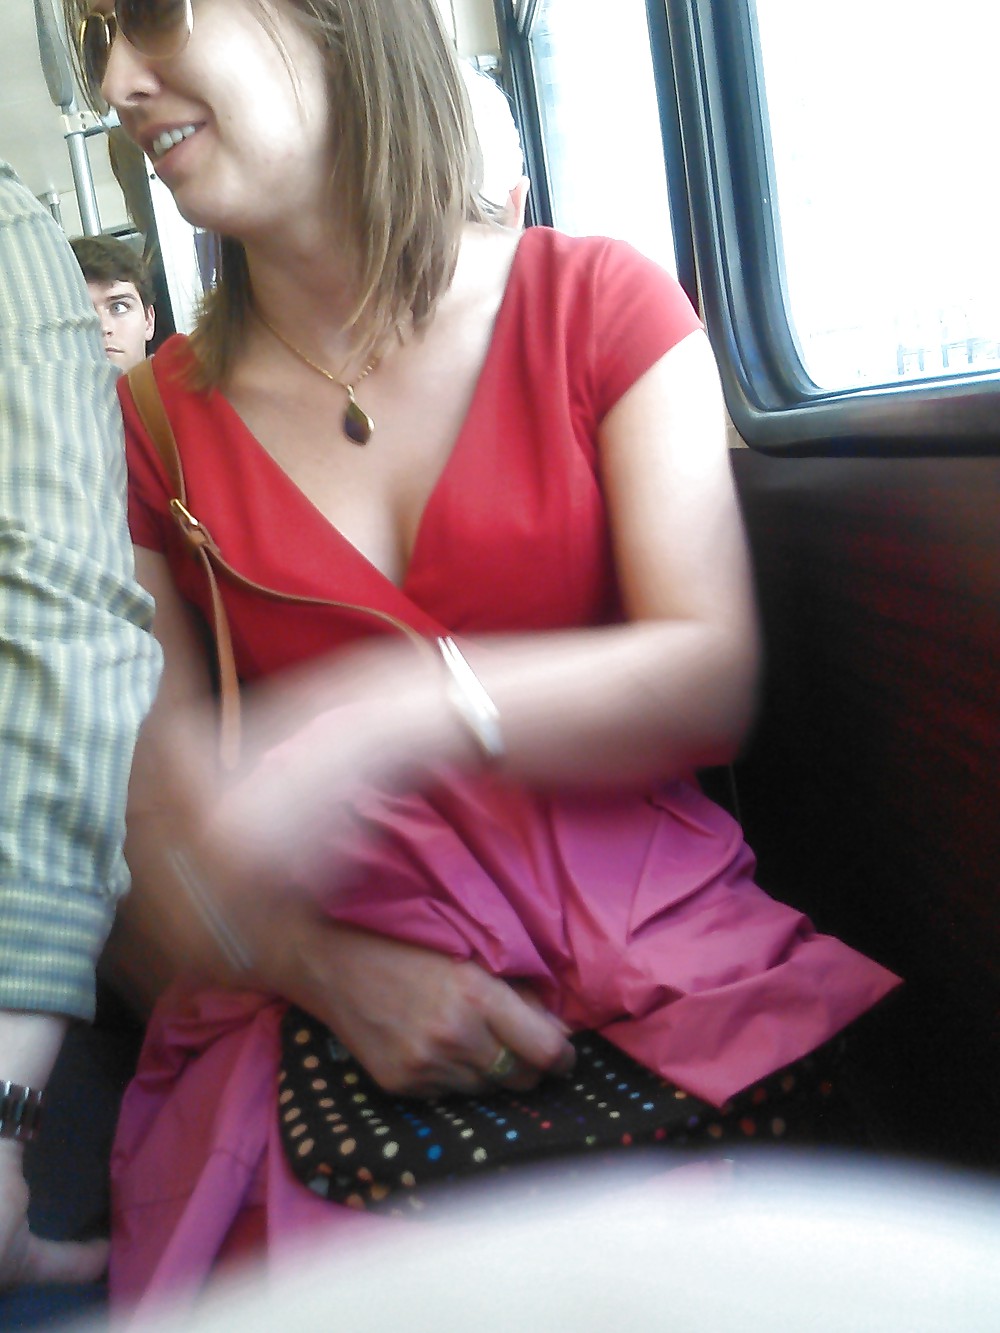 Upskirt - girl in red dress - the tunnel of lust #22587583